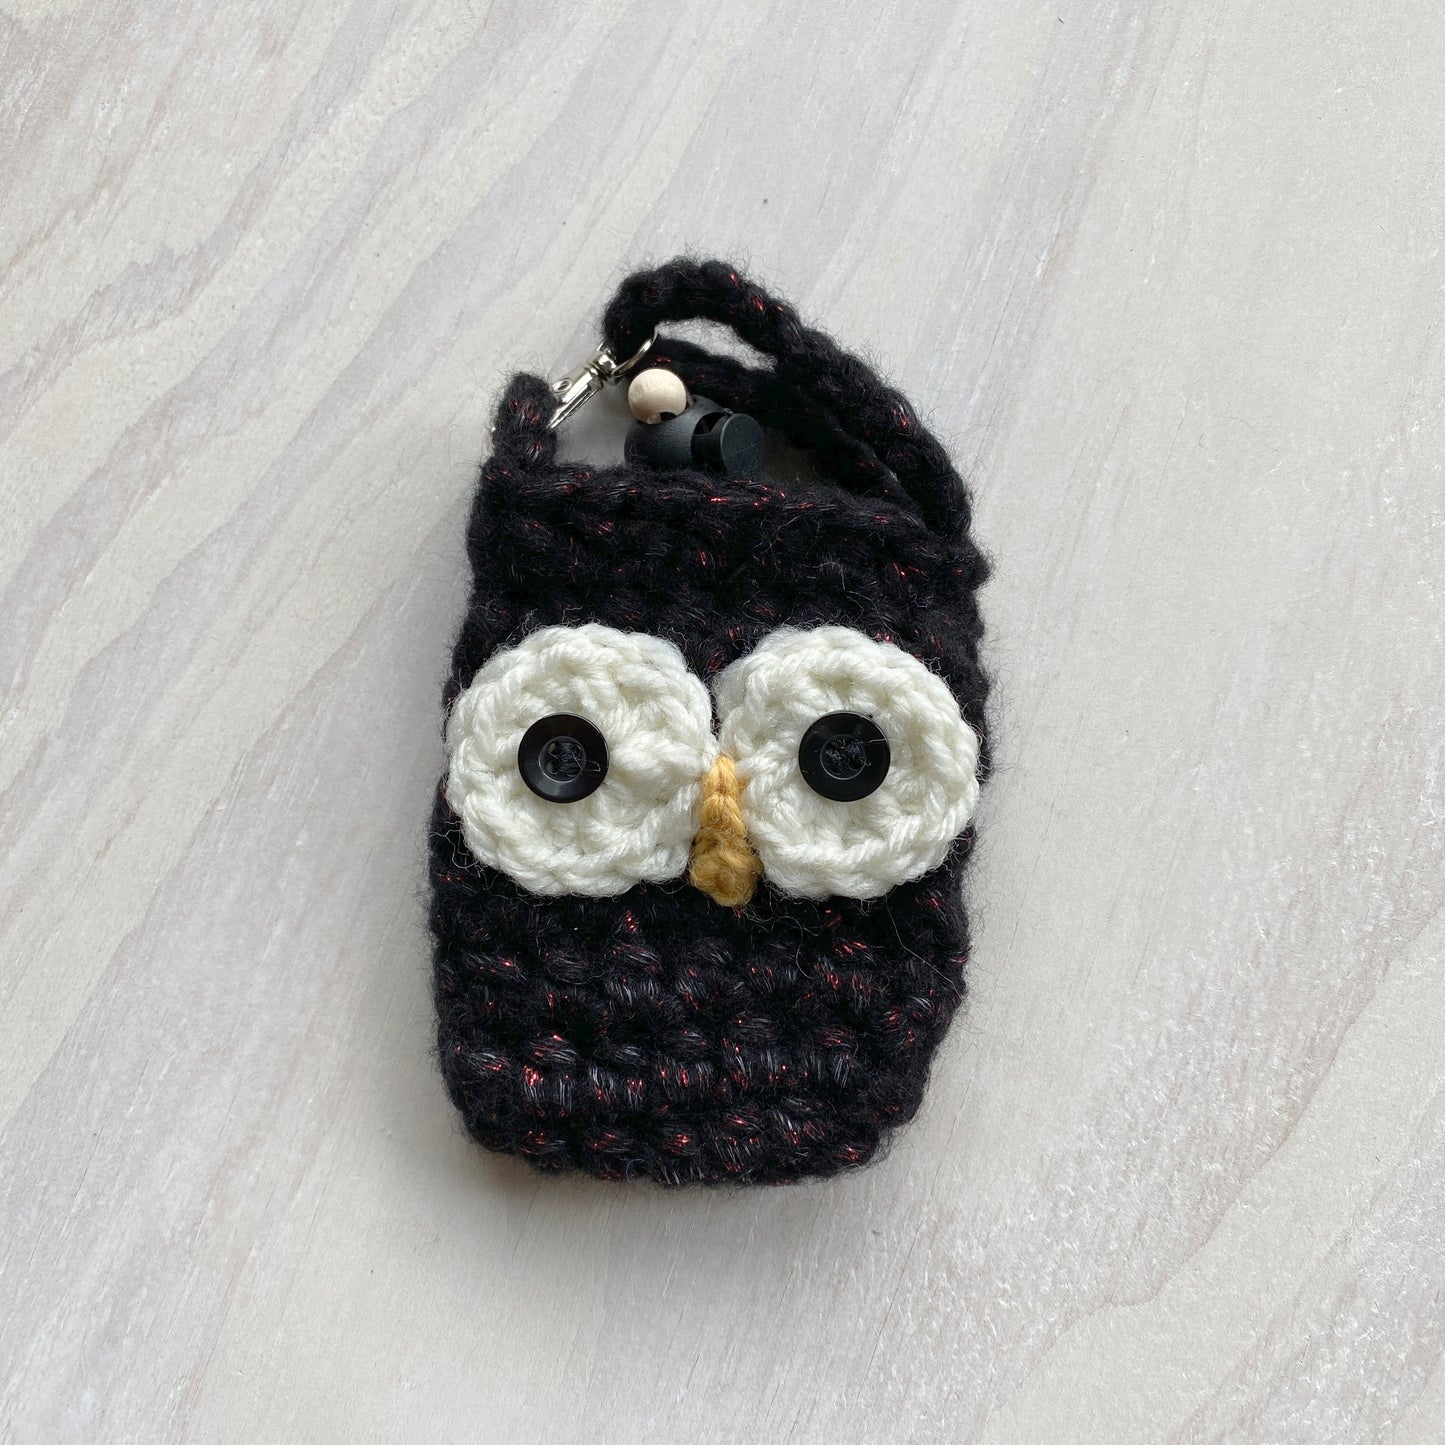 Owl Crochet Sanitizer Bag, Handmade Sanitizer bag with Clasp, Hand Sanitizer holder Can Be Attach to Bag.